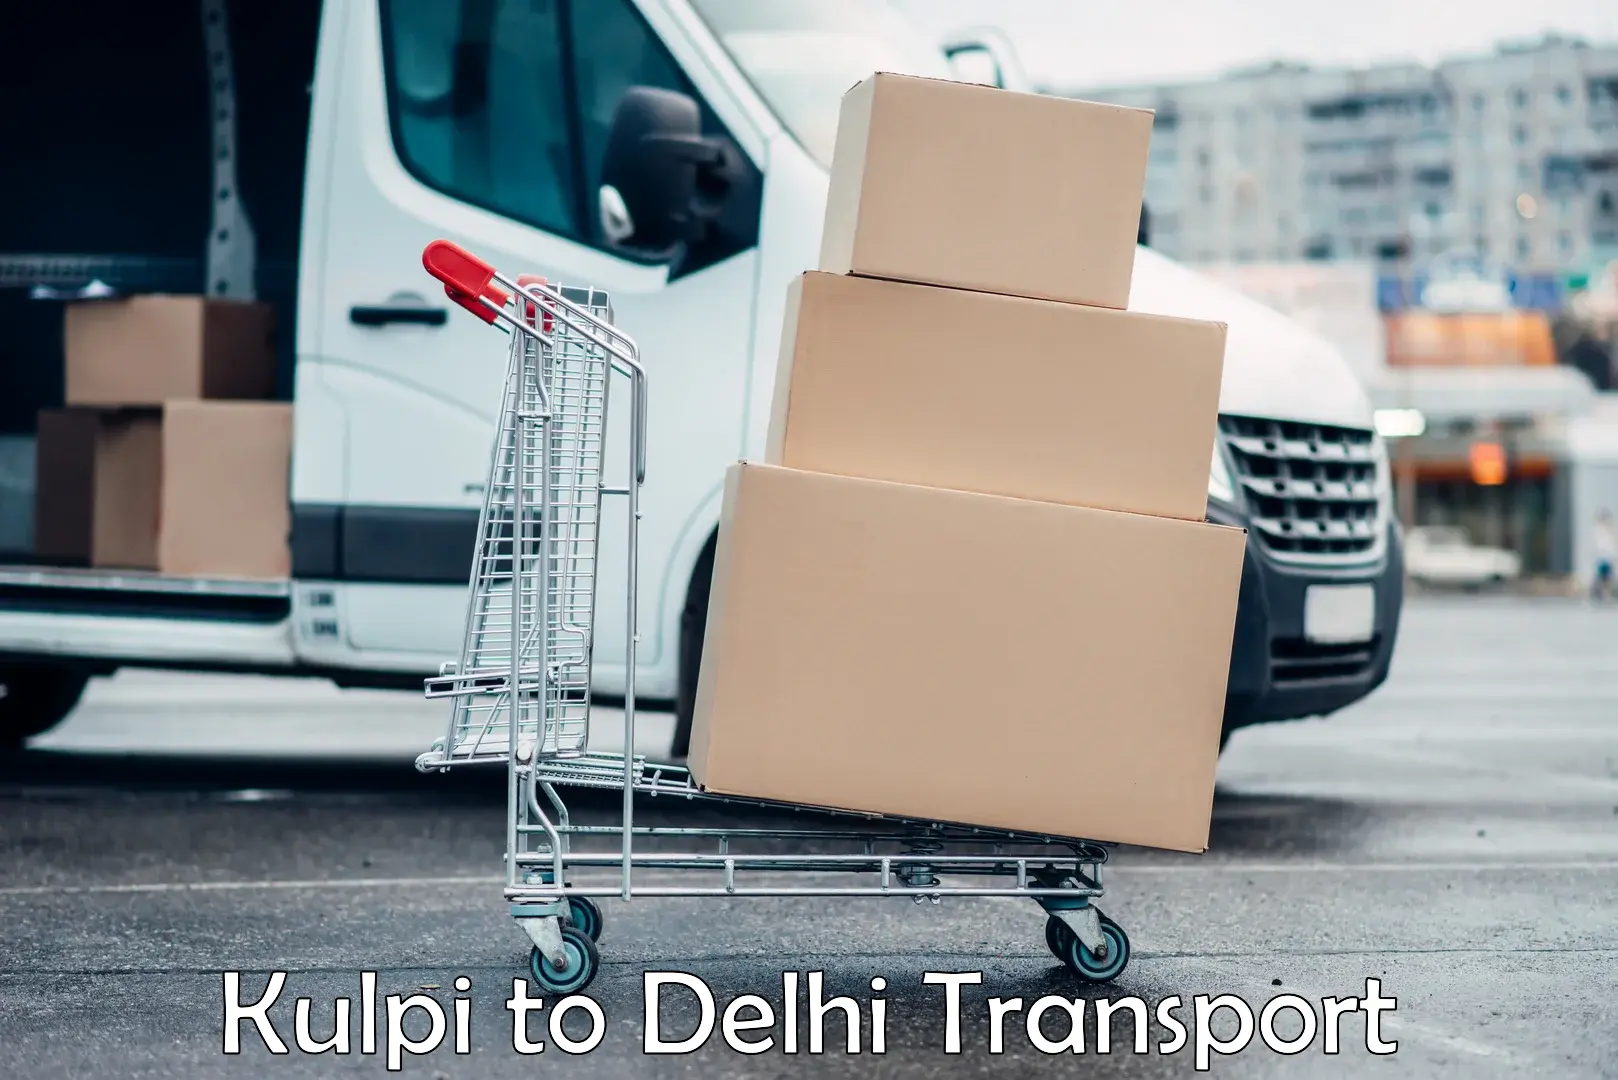 Truck transport companies in India Kulpi to Lodhi Road